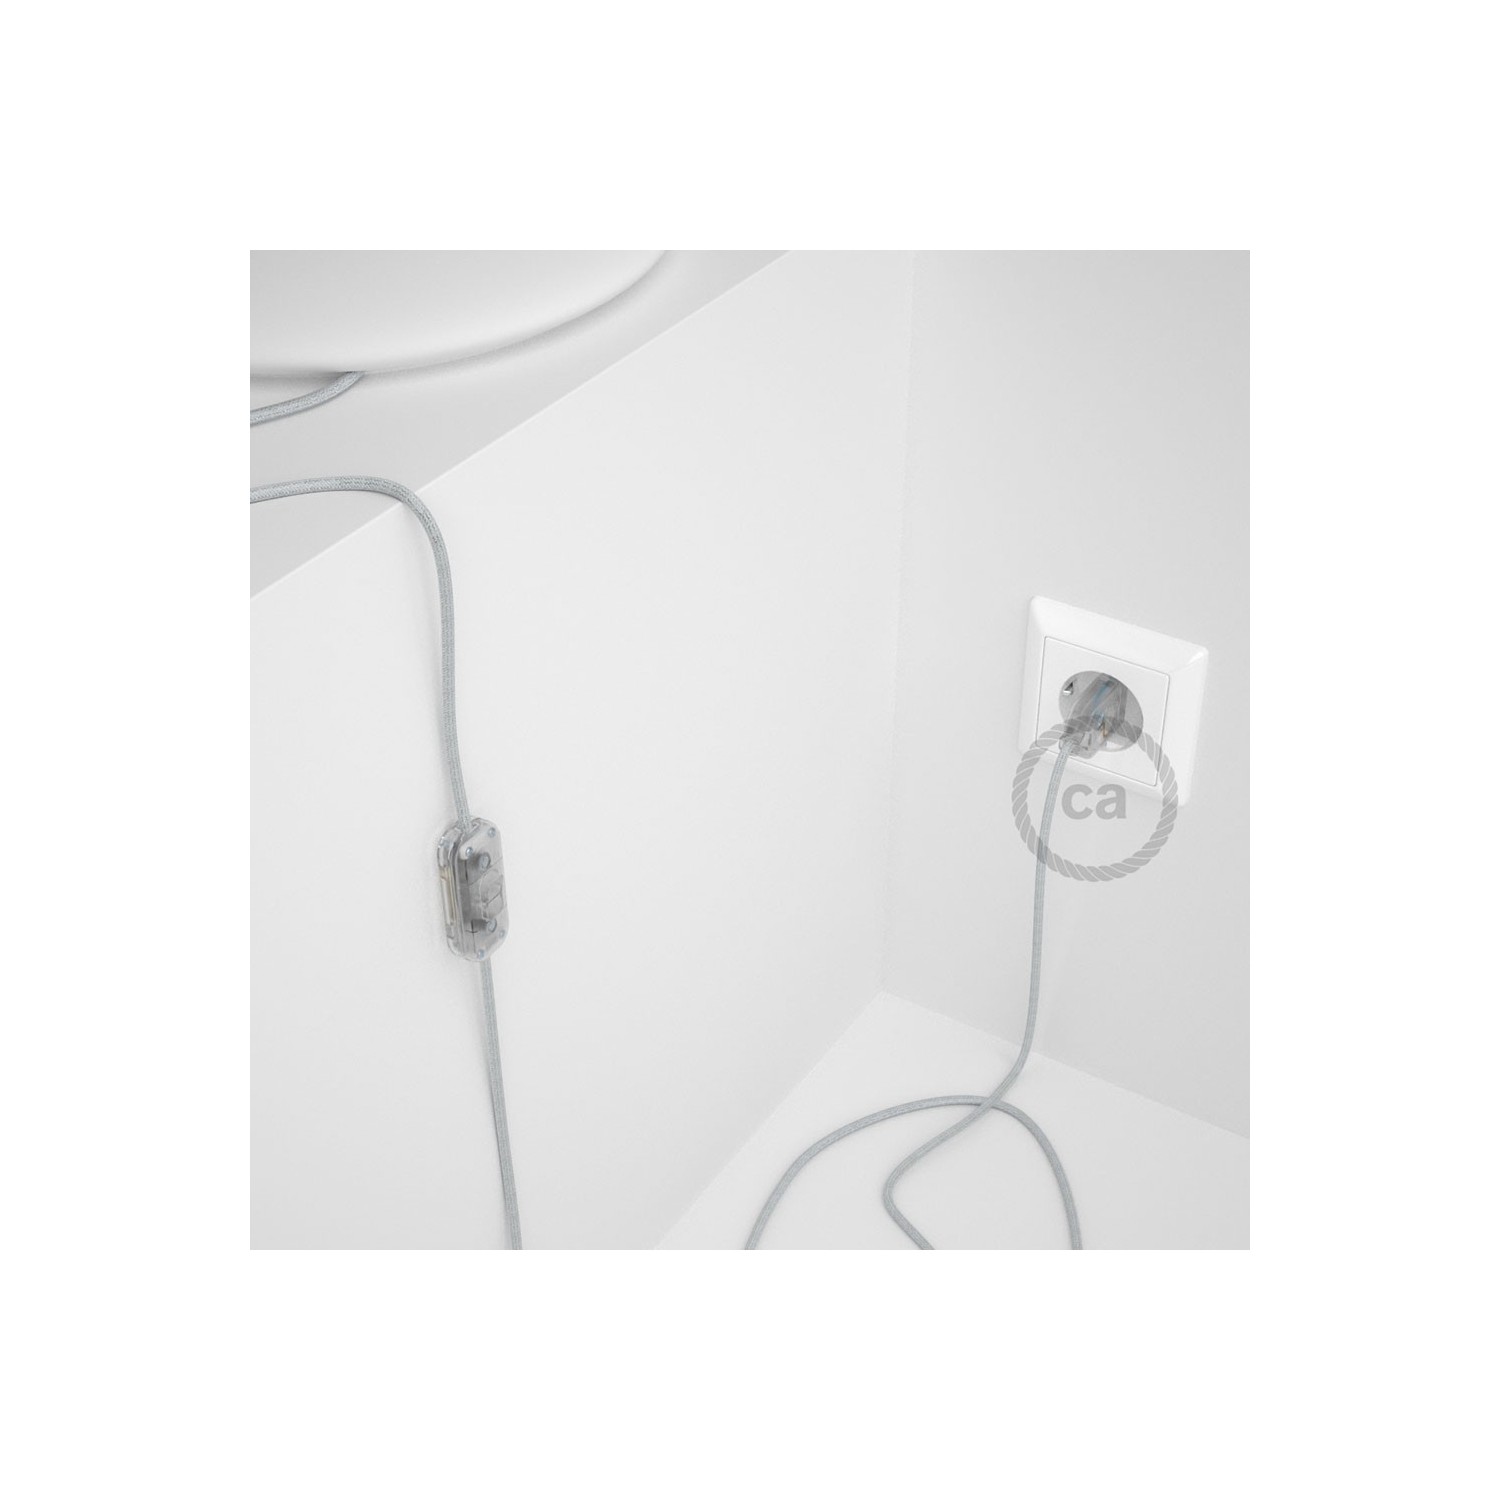 Lamp wiring, RL01 Sparkly White Rayon 1,80 m. Choose the colour of the switch and plug.